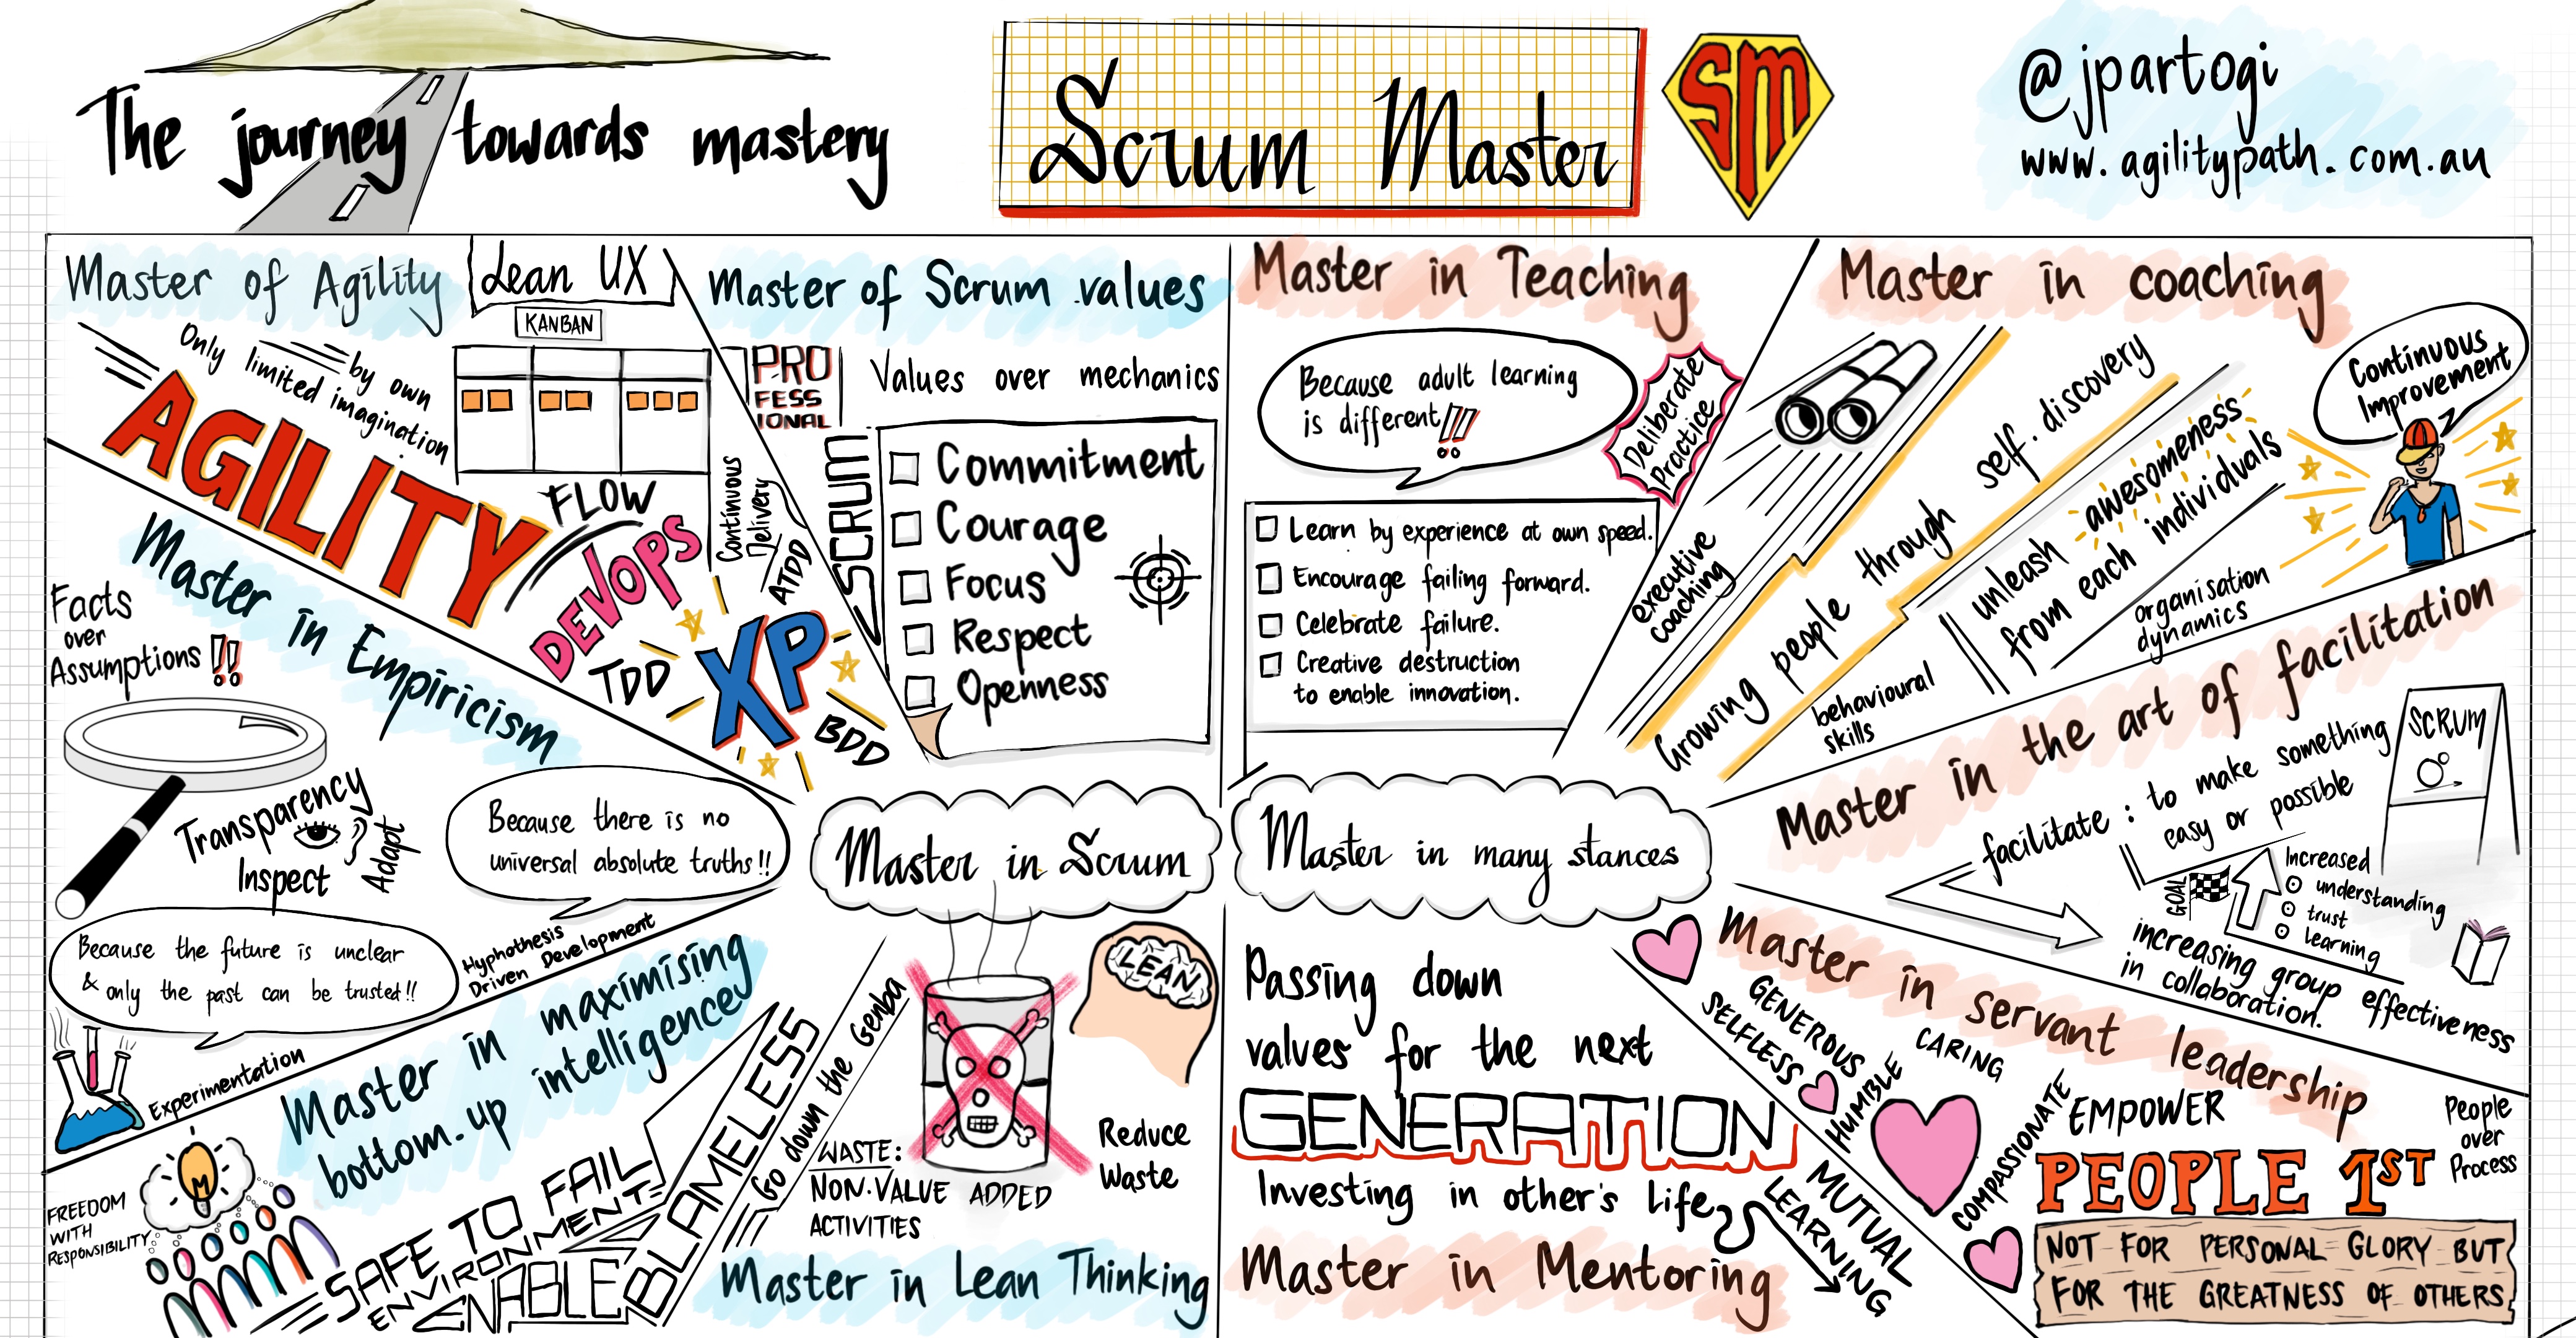 ScrumMaster_AgileCoach_team-lead-facilitator-the-role-of-a-value-driven-leadership-in-building-a-learning-culture-that-delivers-value.jpg